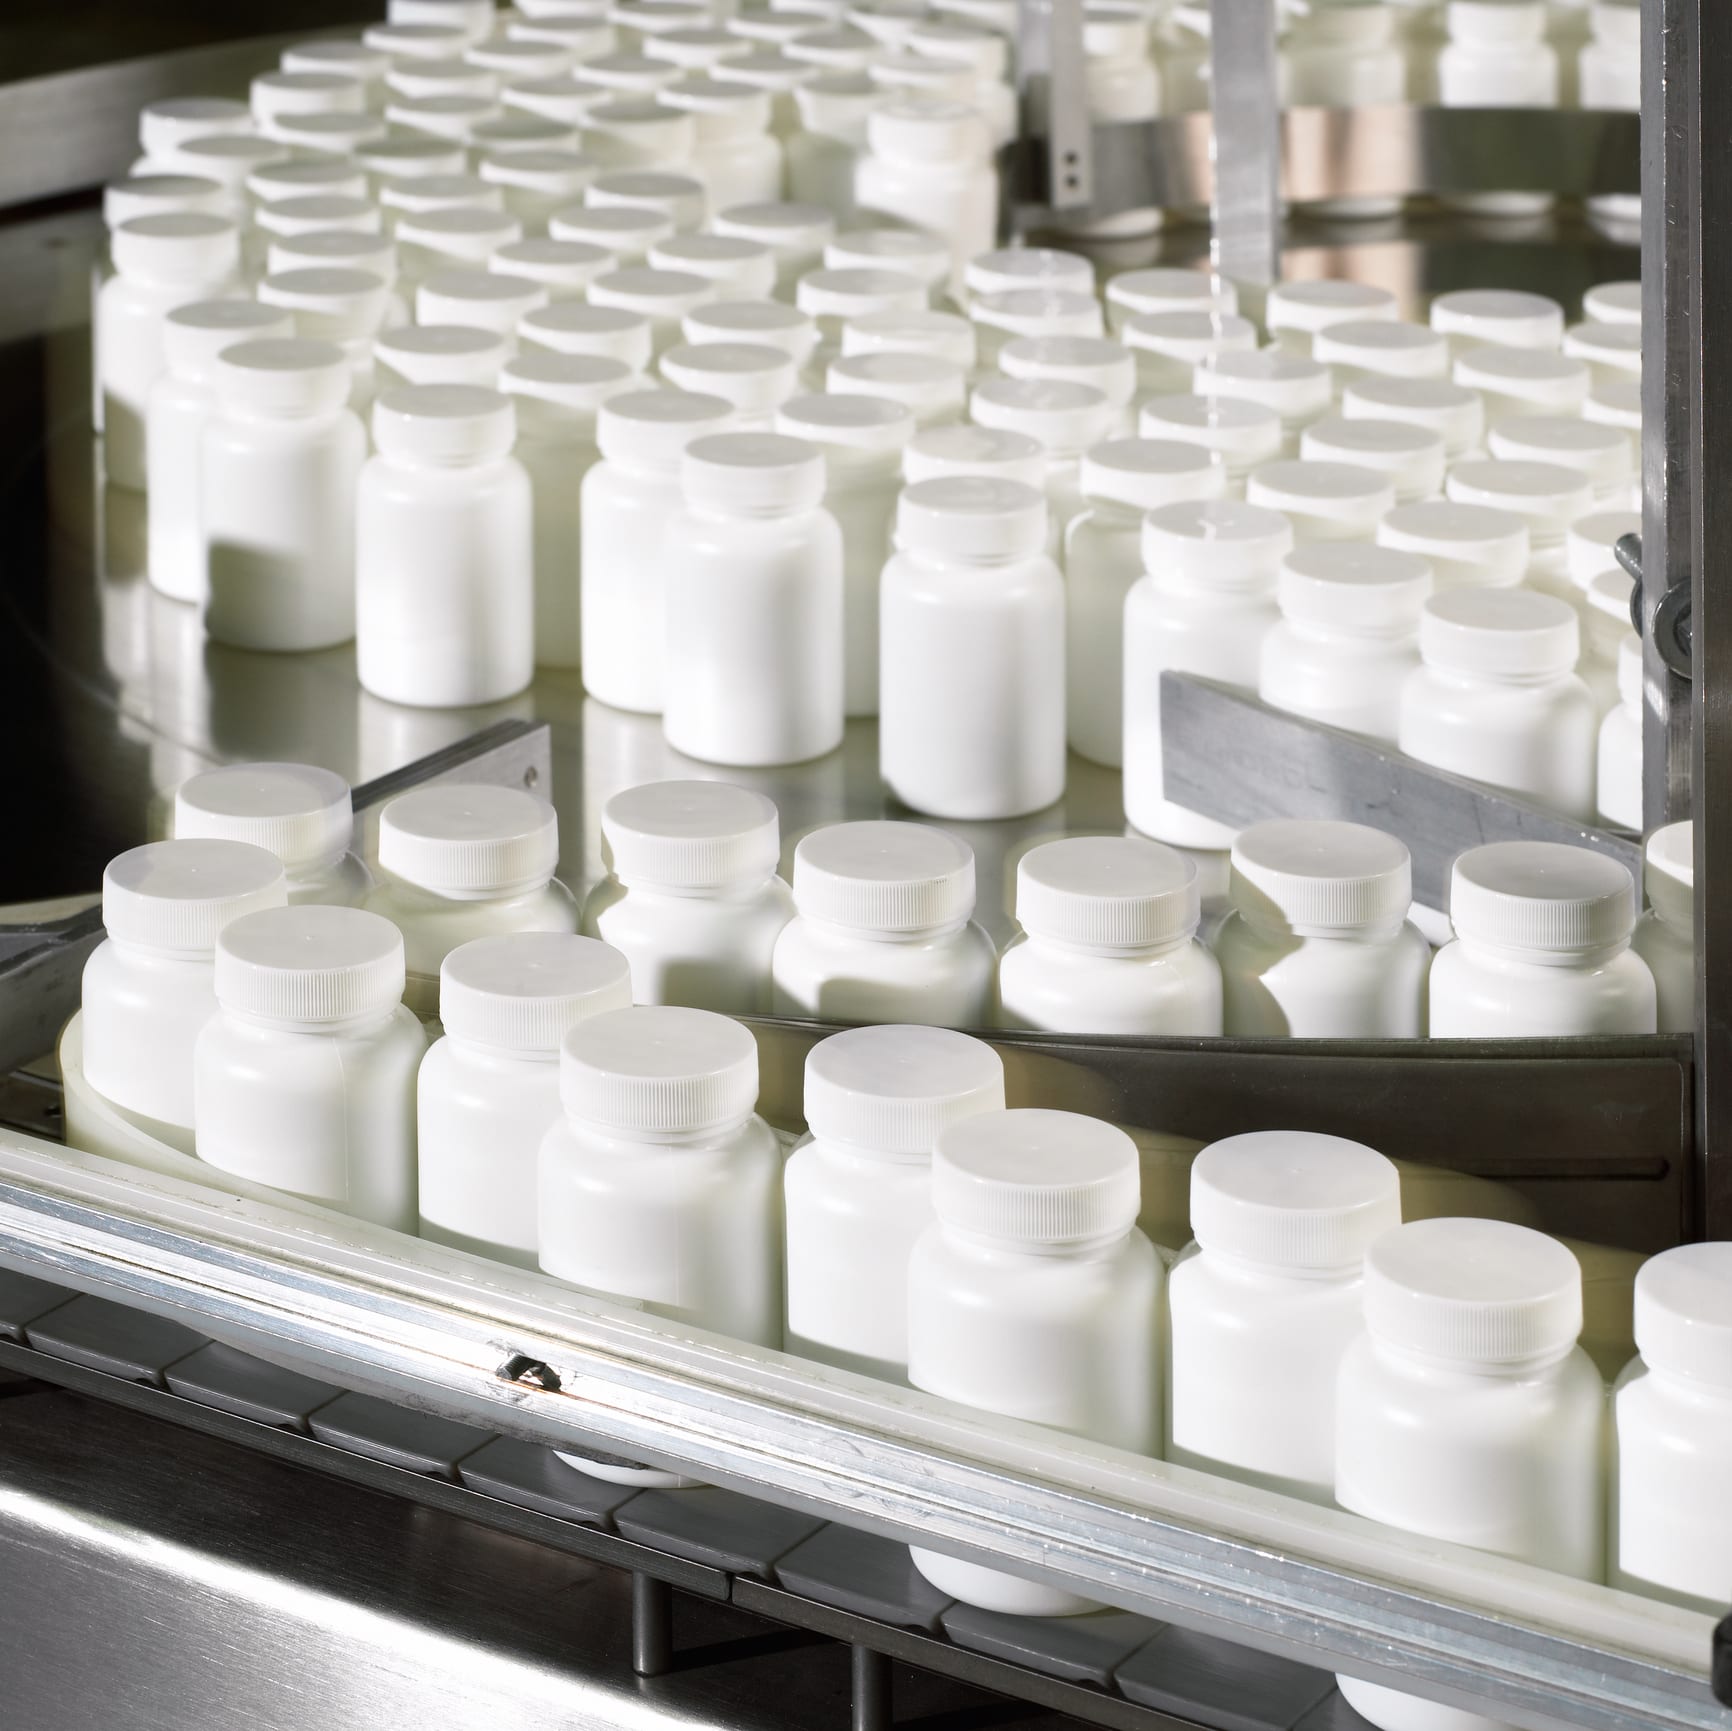 vitamin manufacturing and distribution insurance